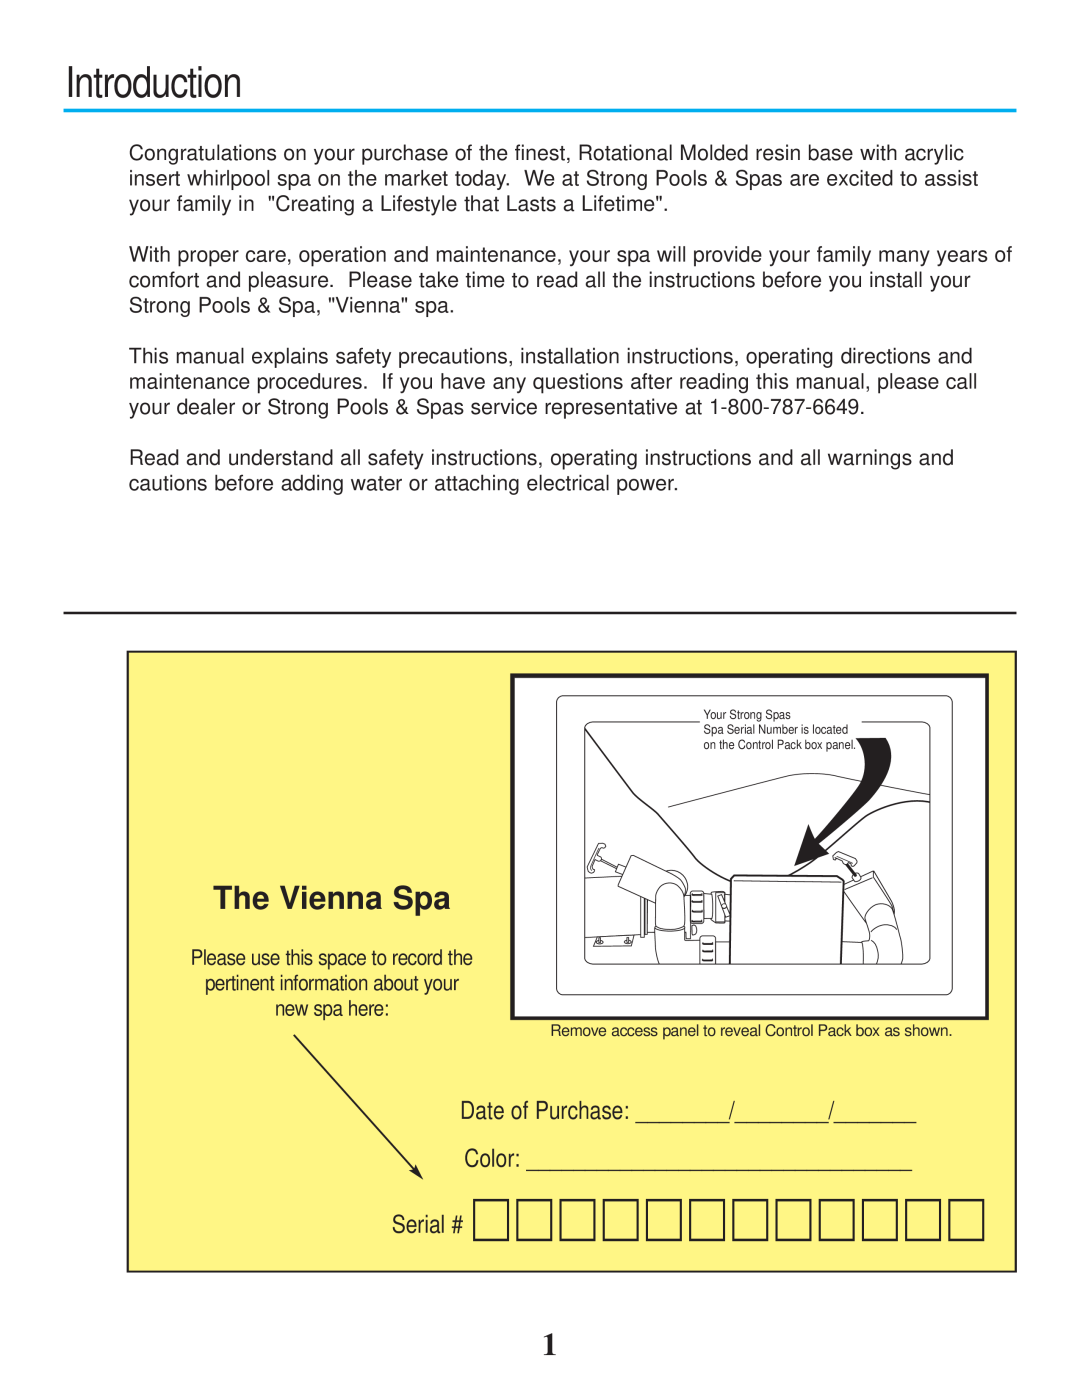 Strong Pools and Spas owner manual Introduction, The Vienna Spa, Date of Purchase, Color Serial # 